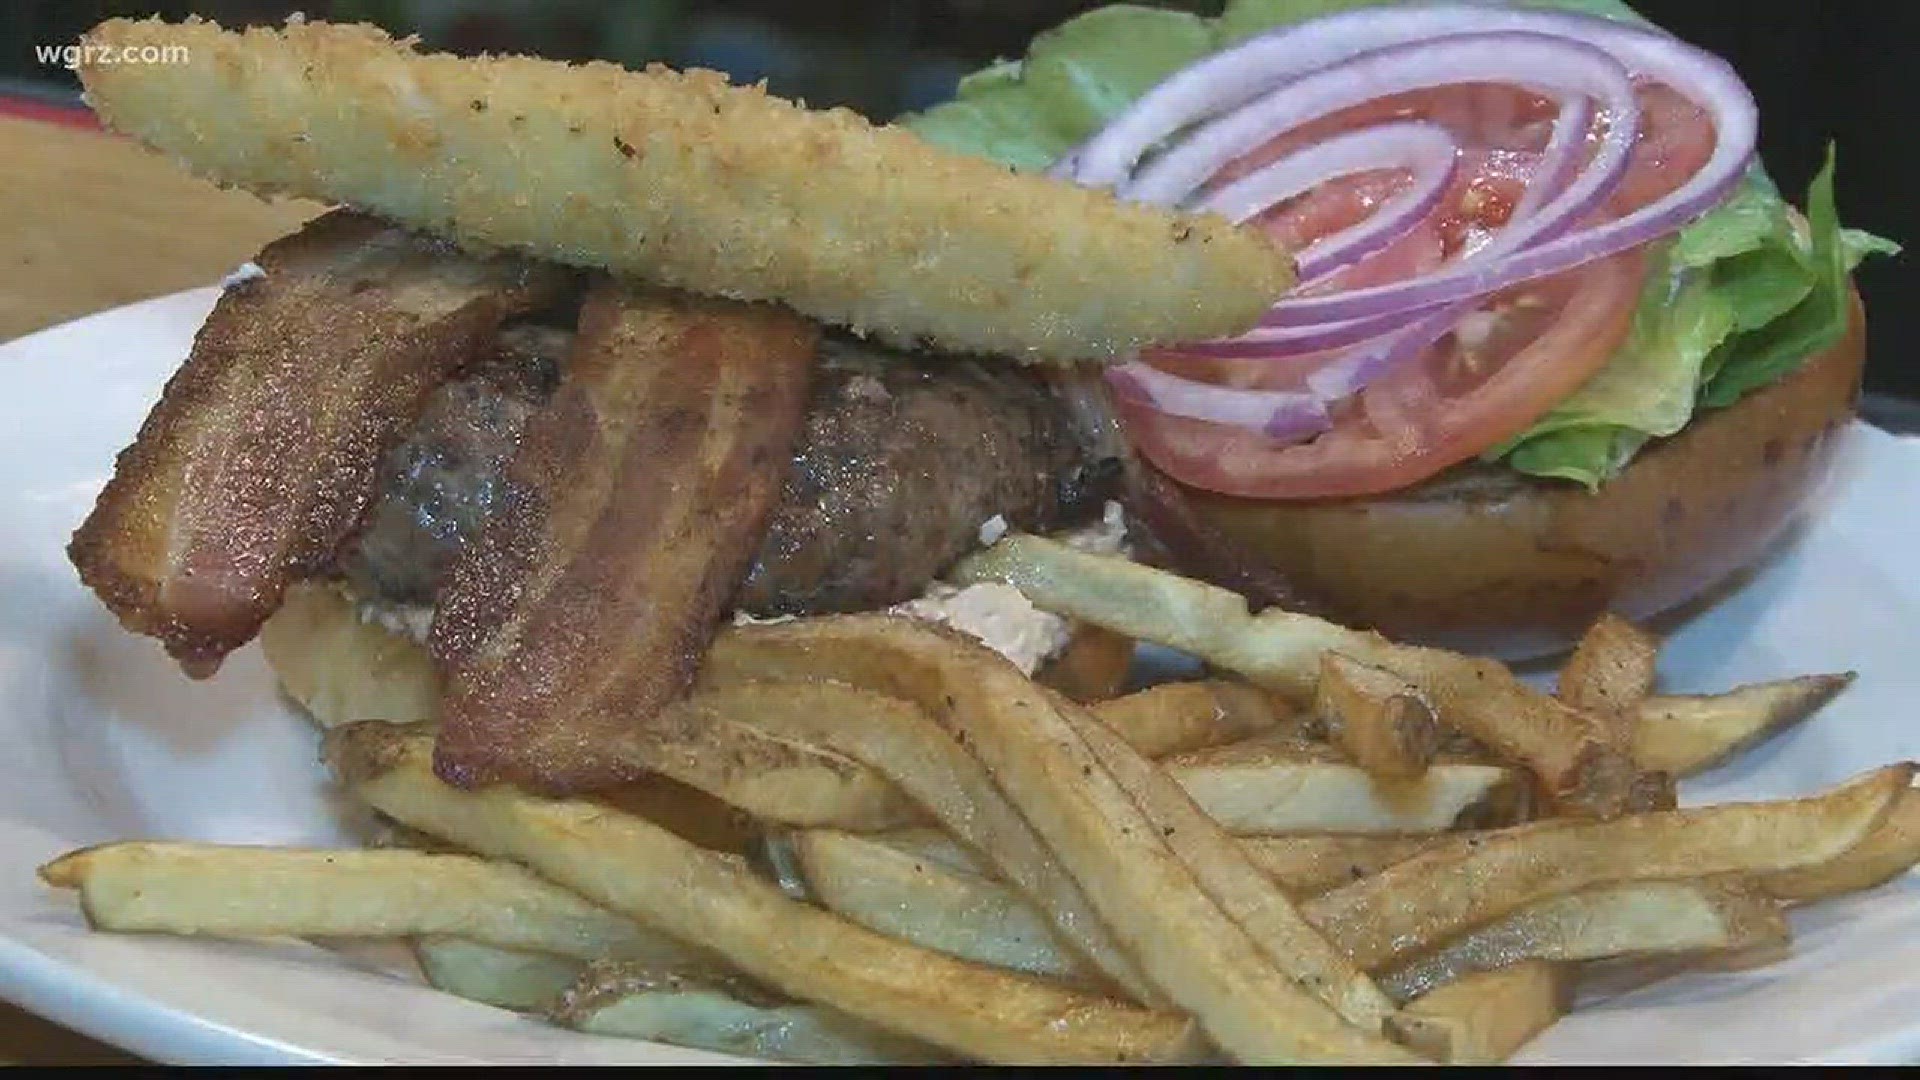 In this week's Unique Eats, we go to a Williamsville restaurant for some Americana eats that will leave you squealing for more.